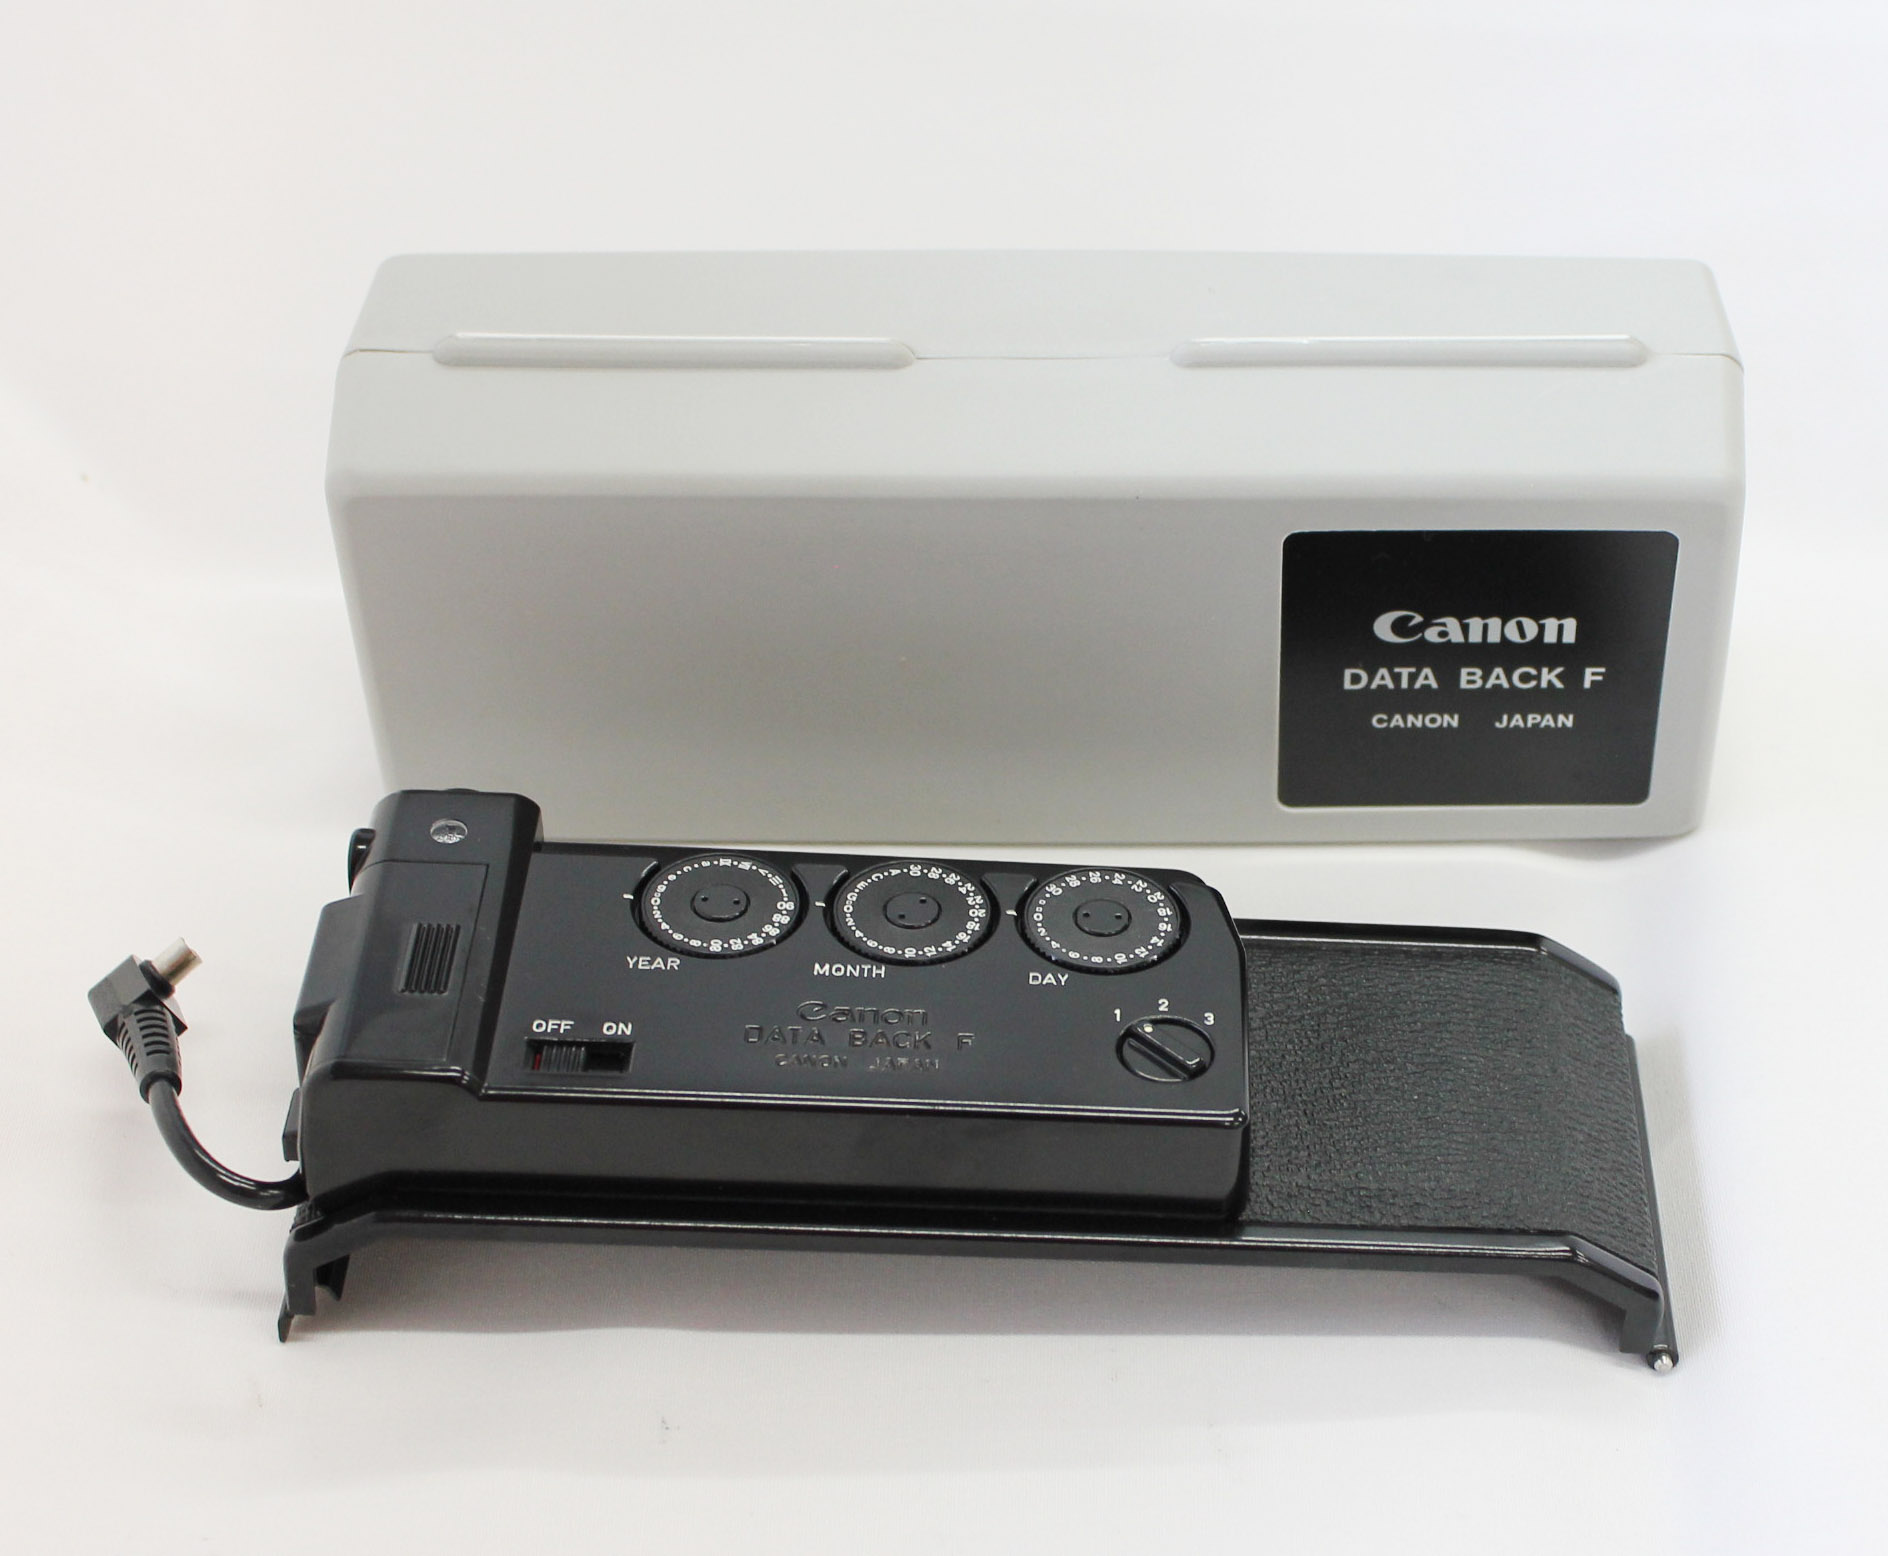 Japan Used Camera Shop | [Near Mint] Canon Data Back F in Case for Canon F-1 from Japan